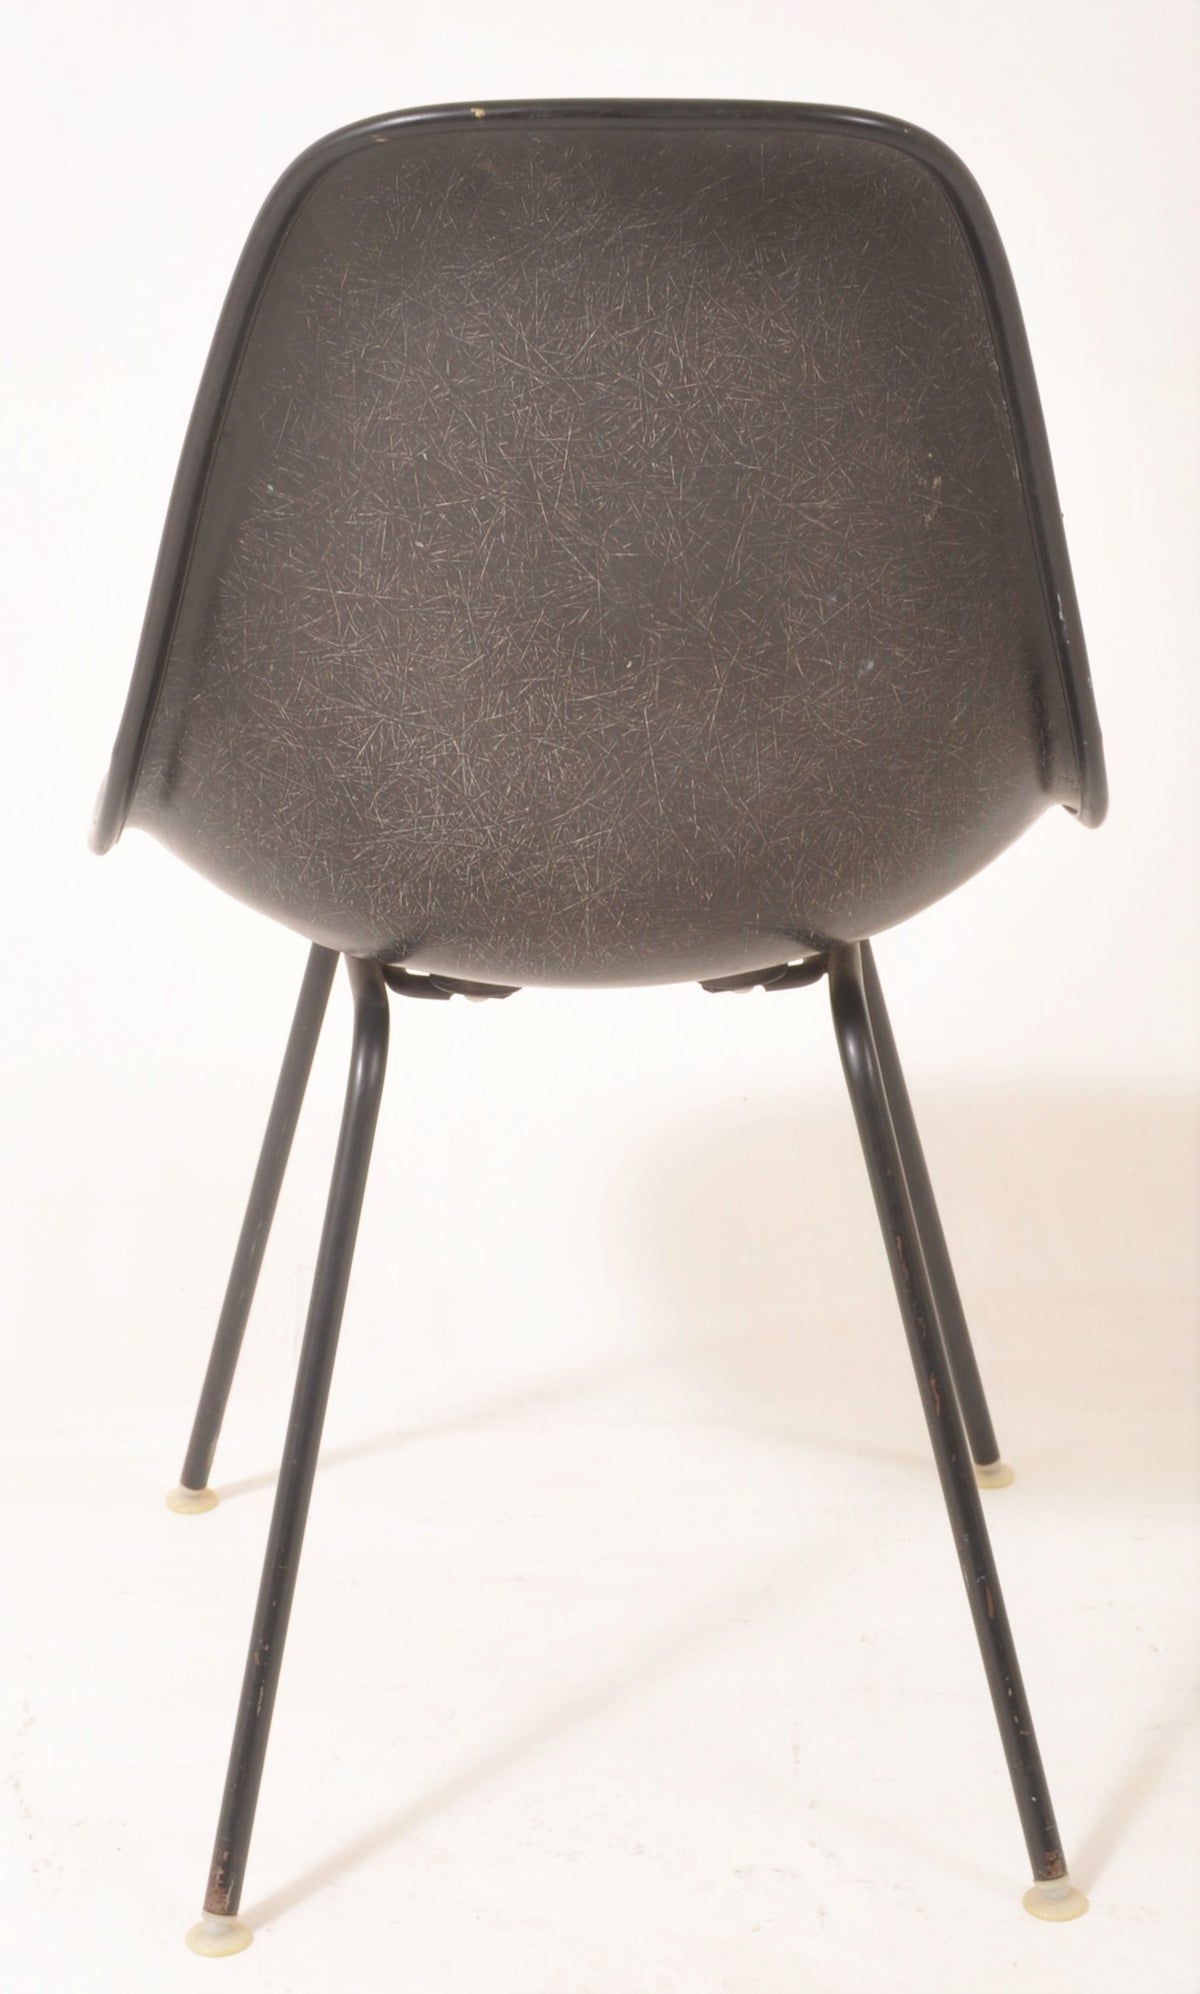 Set of 4 Black Fiberglass Shell Chairs by Charles Eames for Herman Miller, 1968